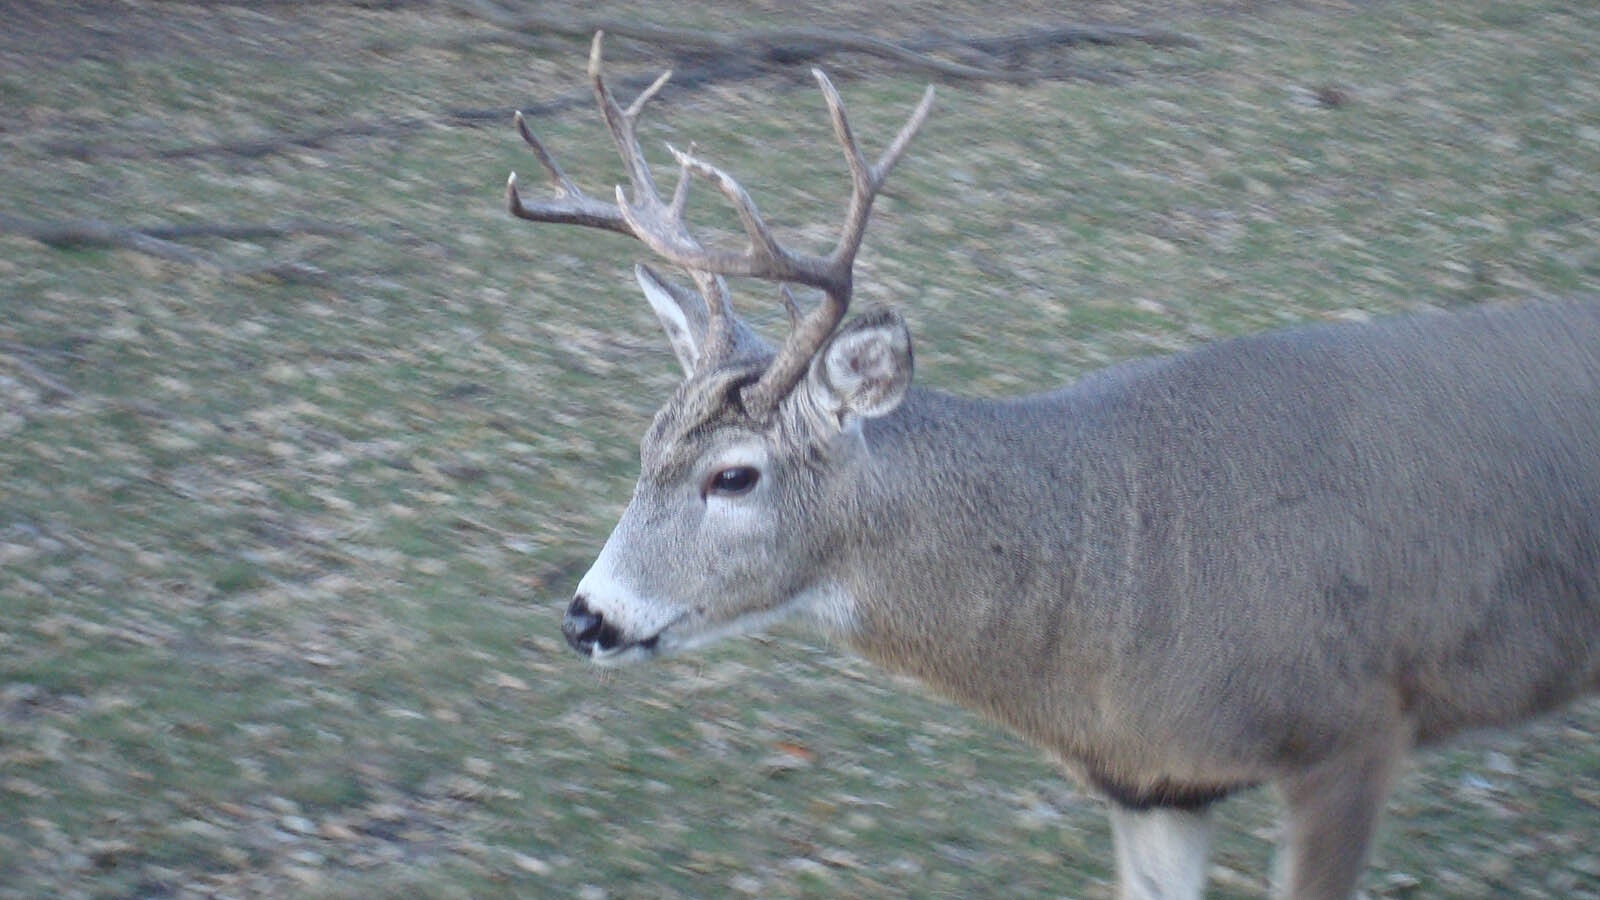 This hybrid mule deer-whitetail buck has antler structure and facial characteristics of both species.